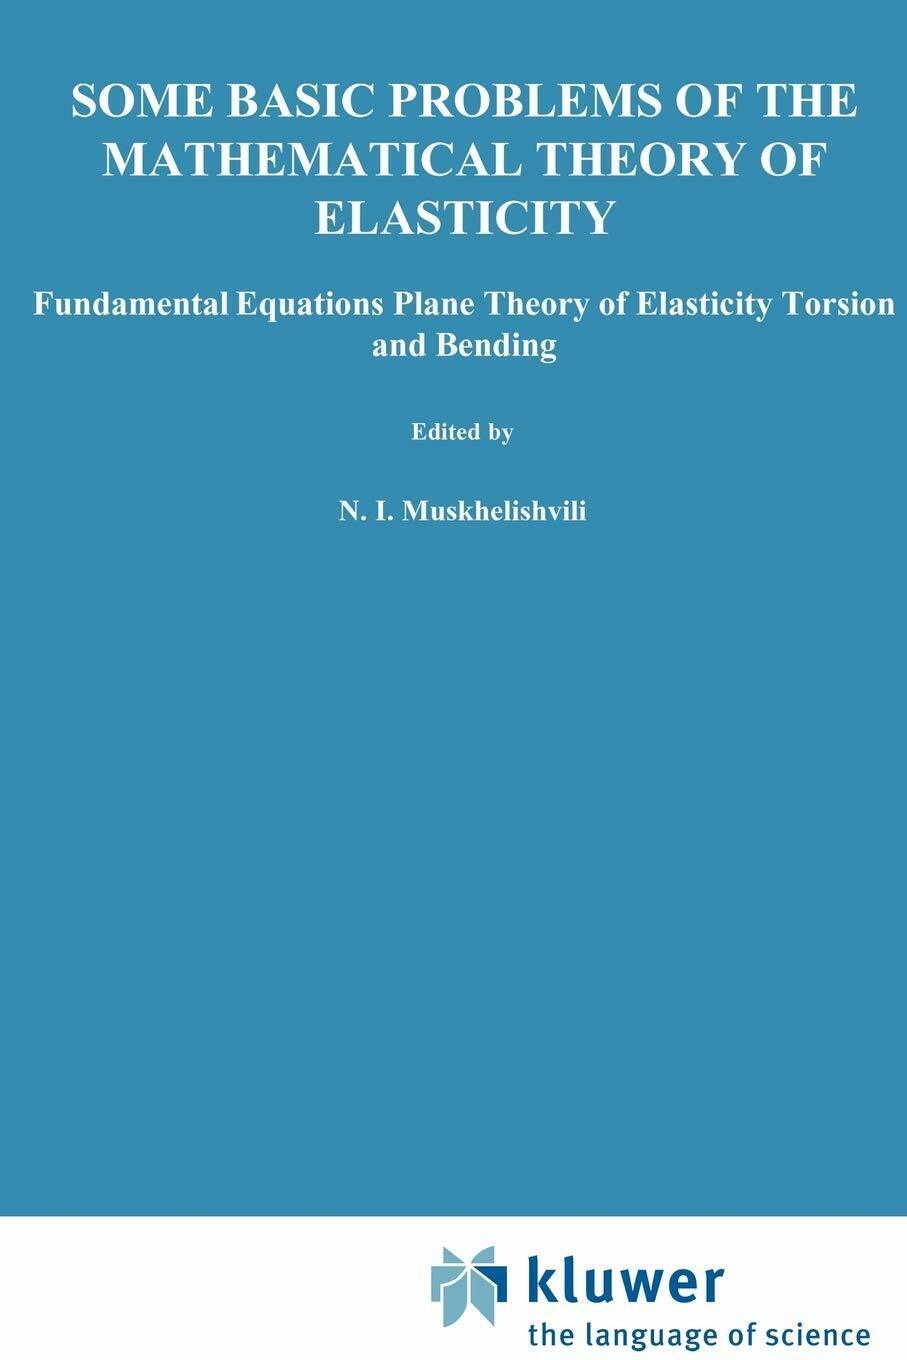 Some Basic Problems of the Mathematical Theory of Elasticity - Springer, 2010